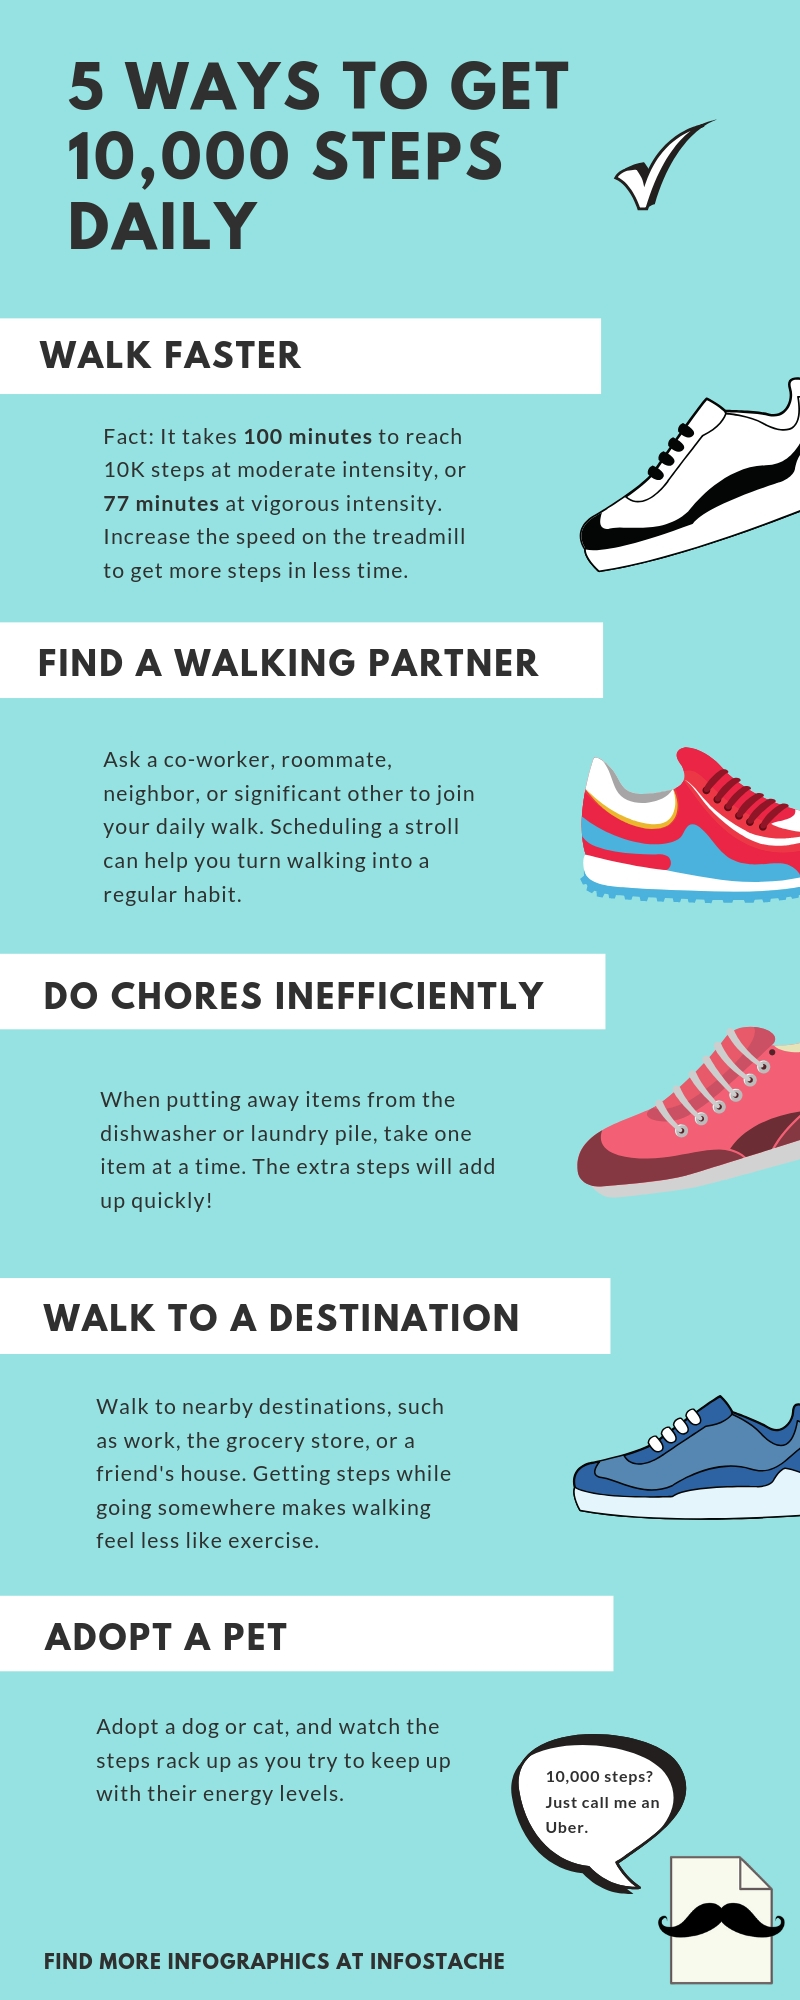 5 Ways to Get 10,000 Steps Daily [Infographic] - Infostache